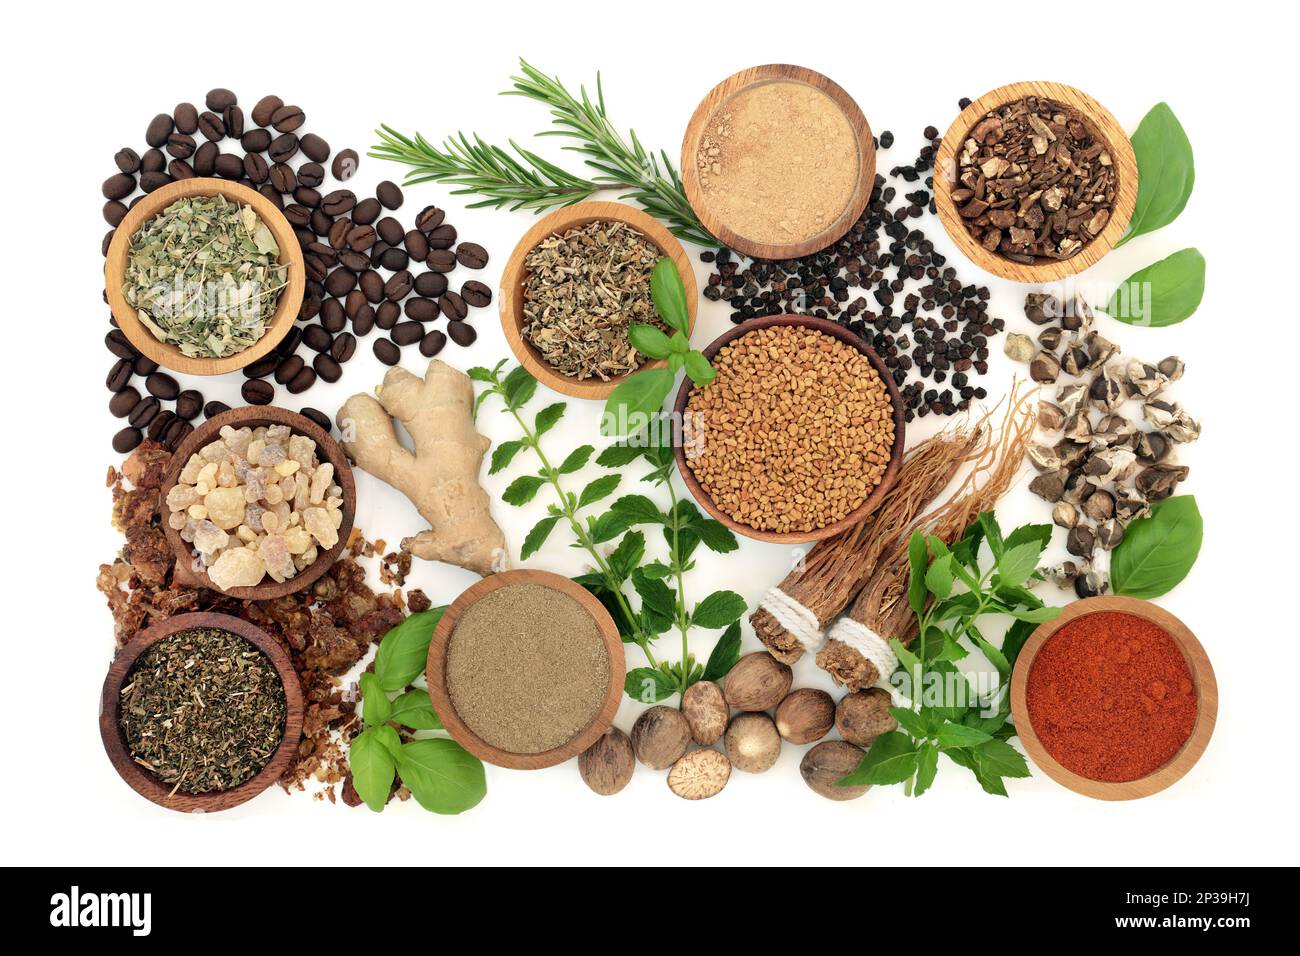 Nervine food ingredients with herbs, spices. Health food nerve tonic ingredients to stimulate and support the nervous system. Healthy  adaptogen foods. Stock Photo